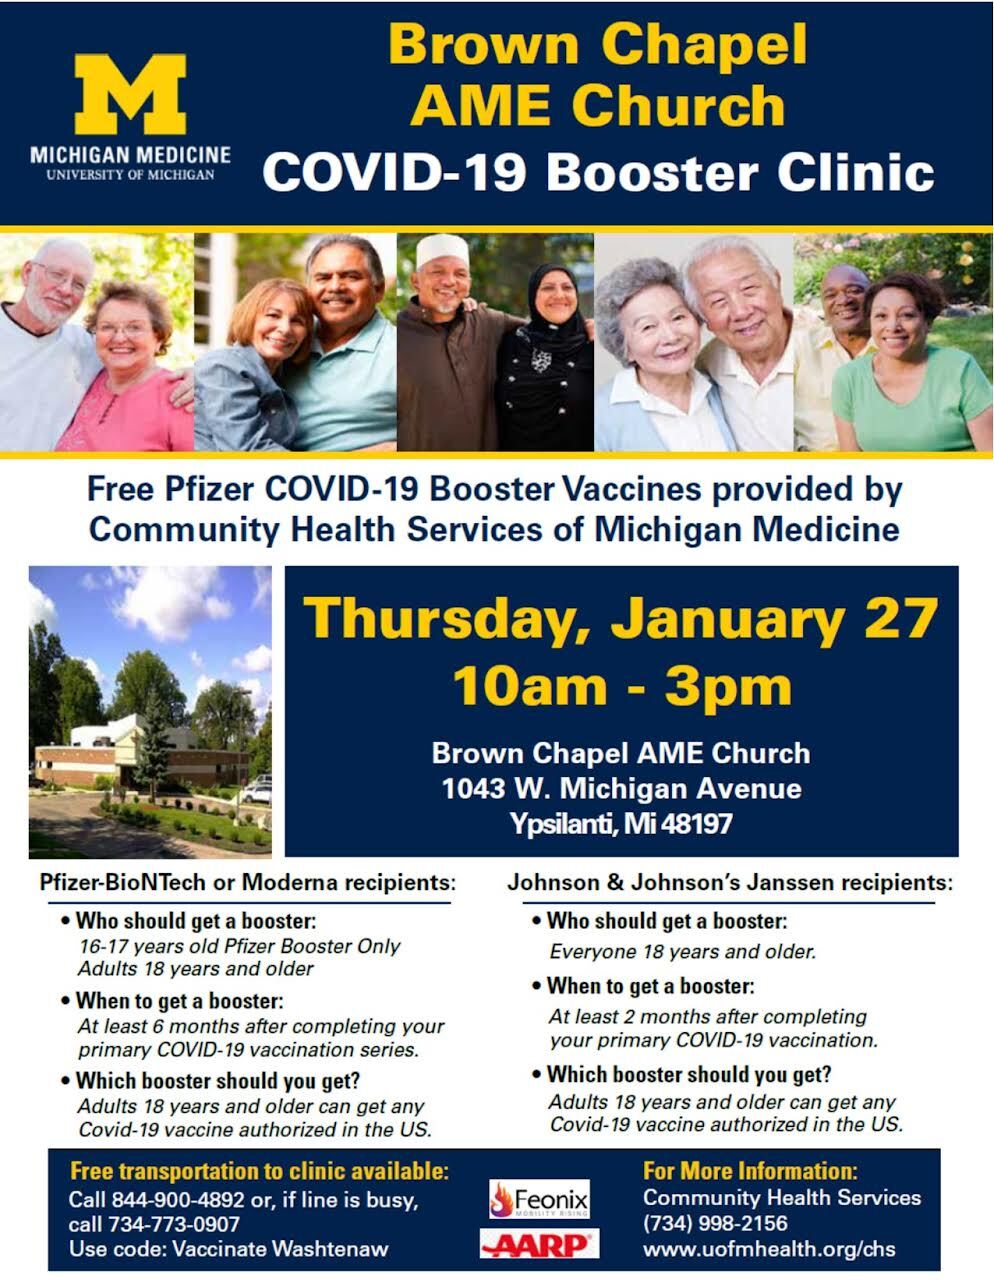 Brown Chapel AME Church will be hosting a COVID-19 Booster Clinic Thursday, Jan. 27, 10 am - 3pm. Please see the flyer for additional information.